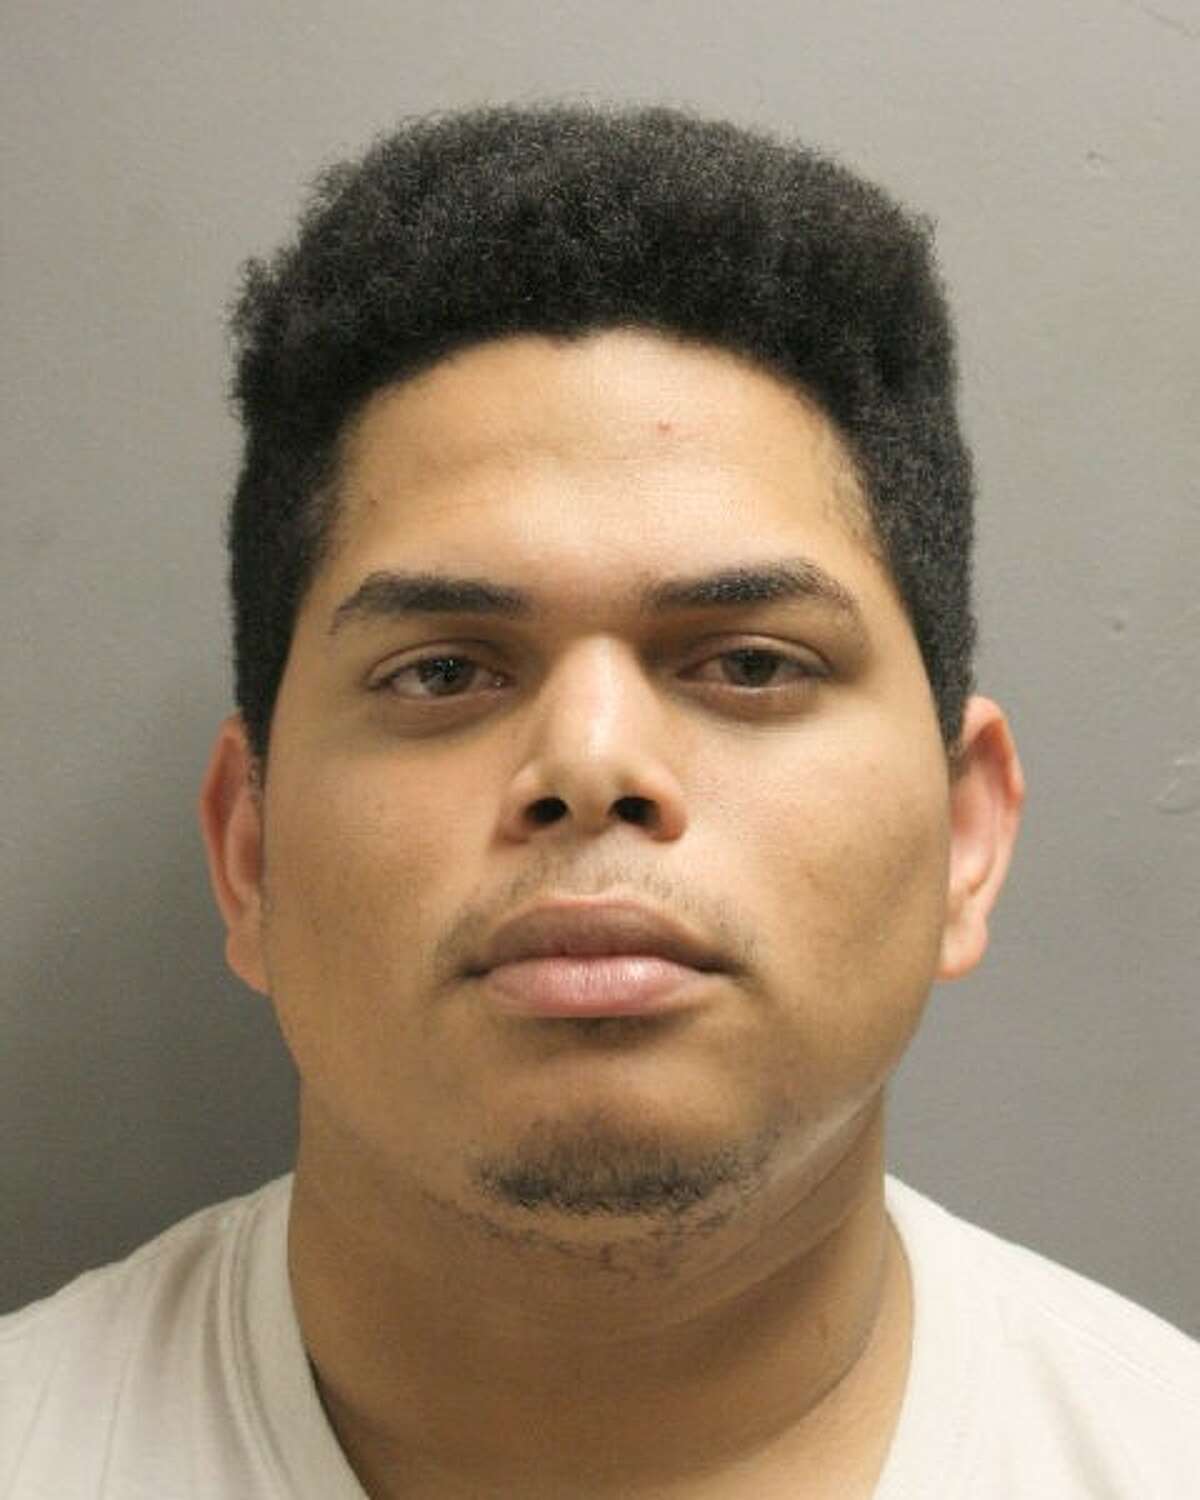 Fugitive: Isnael Borges Rosell is wanted for Indecency with a Child by Contact.  The victim, in this case, was 12 years old.  He is a Hispanic male, 26 years old, approximately 6'2", with brown eyes and short curly black hair that was colored blonde on top.  Rosell could be in the Houston area or Atlanta Georgia area.  Warrant #: 1651035